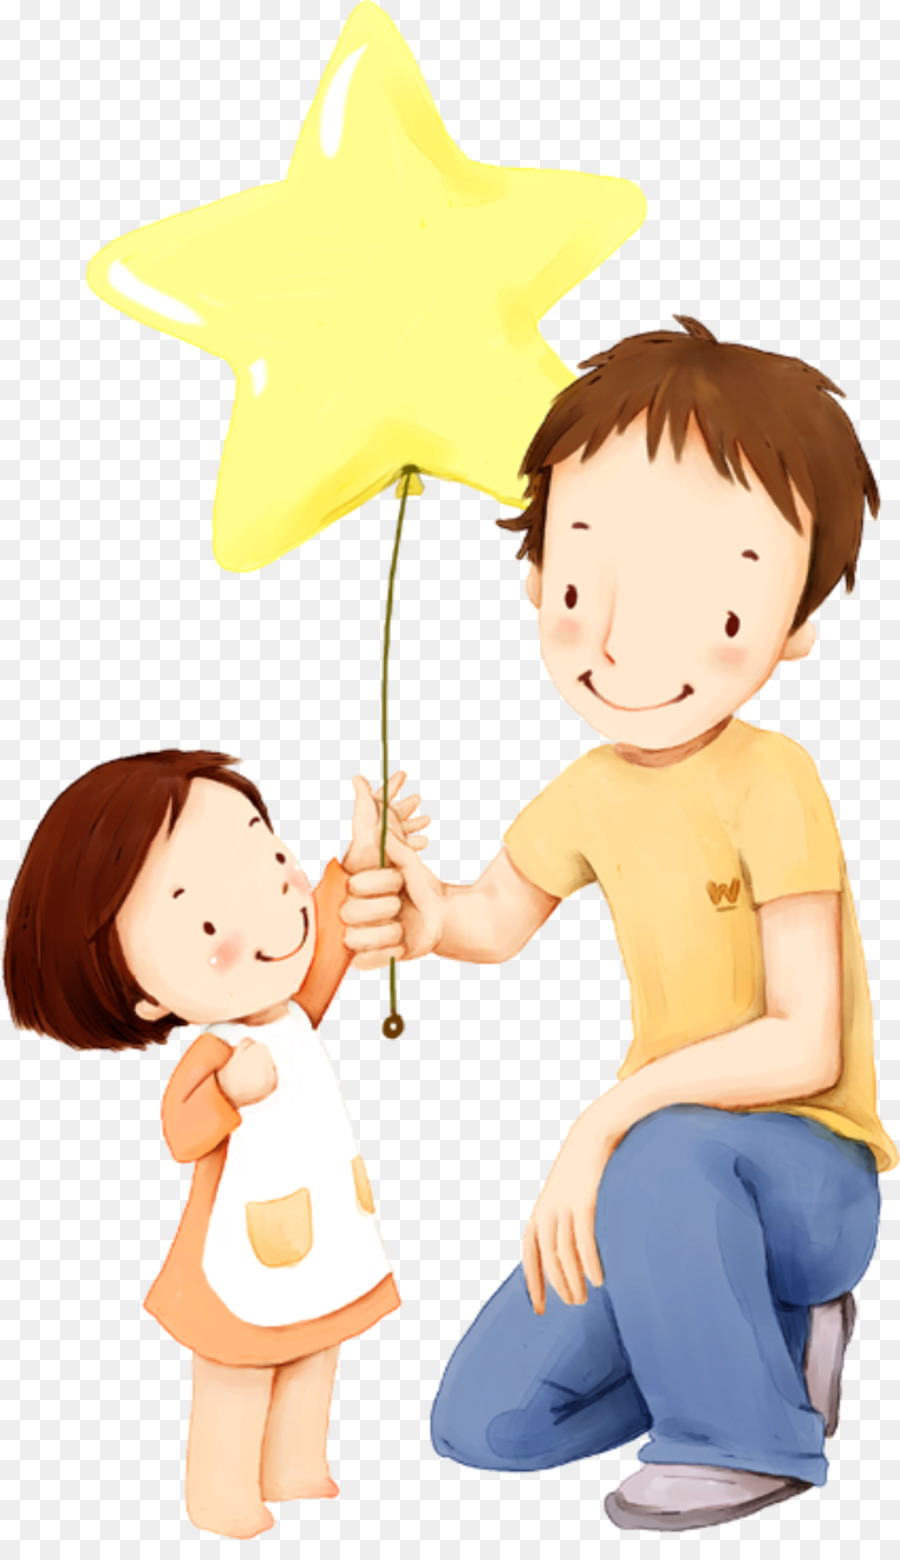 Dad clipart affection. Boy cartoon png download